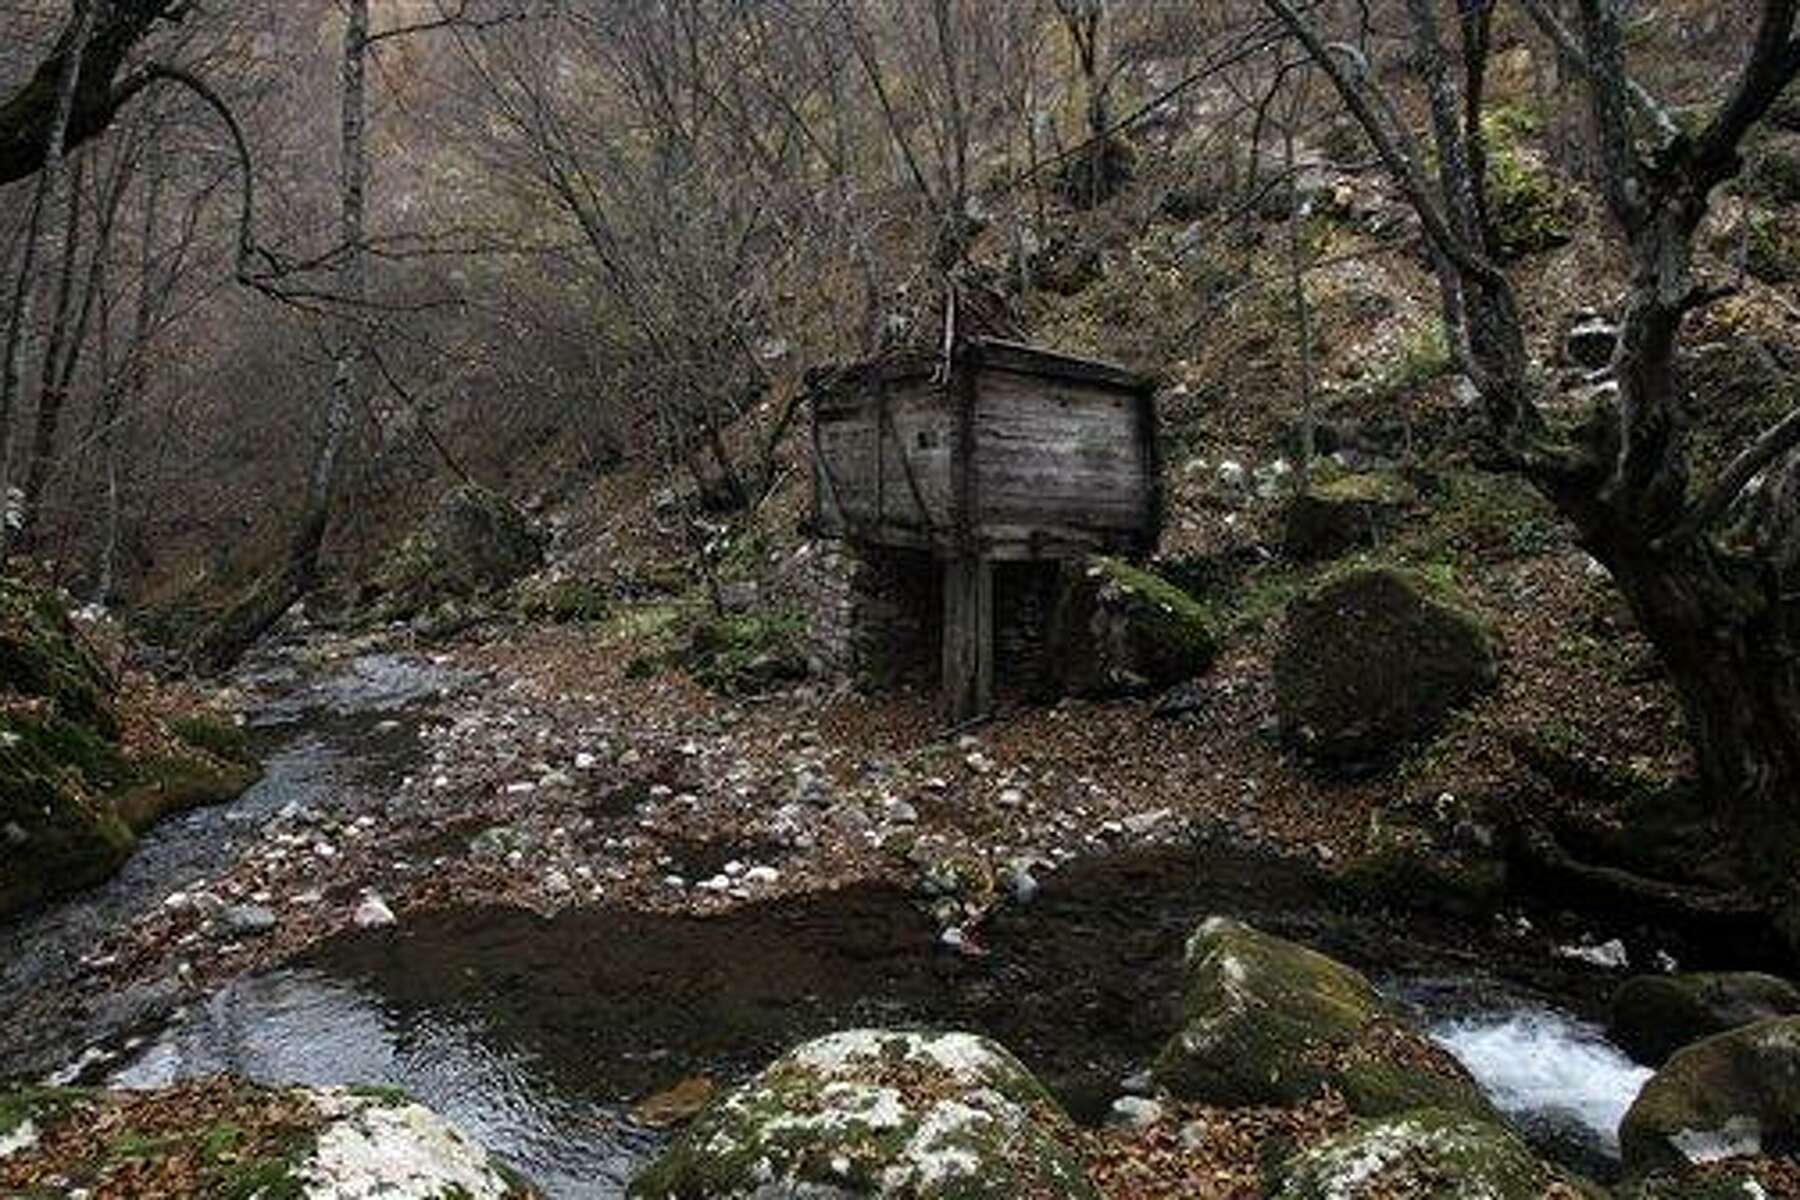 A well in serbia inhabited by a vampire